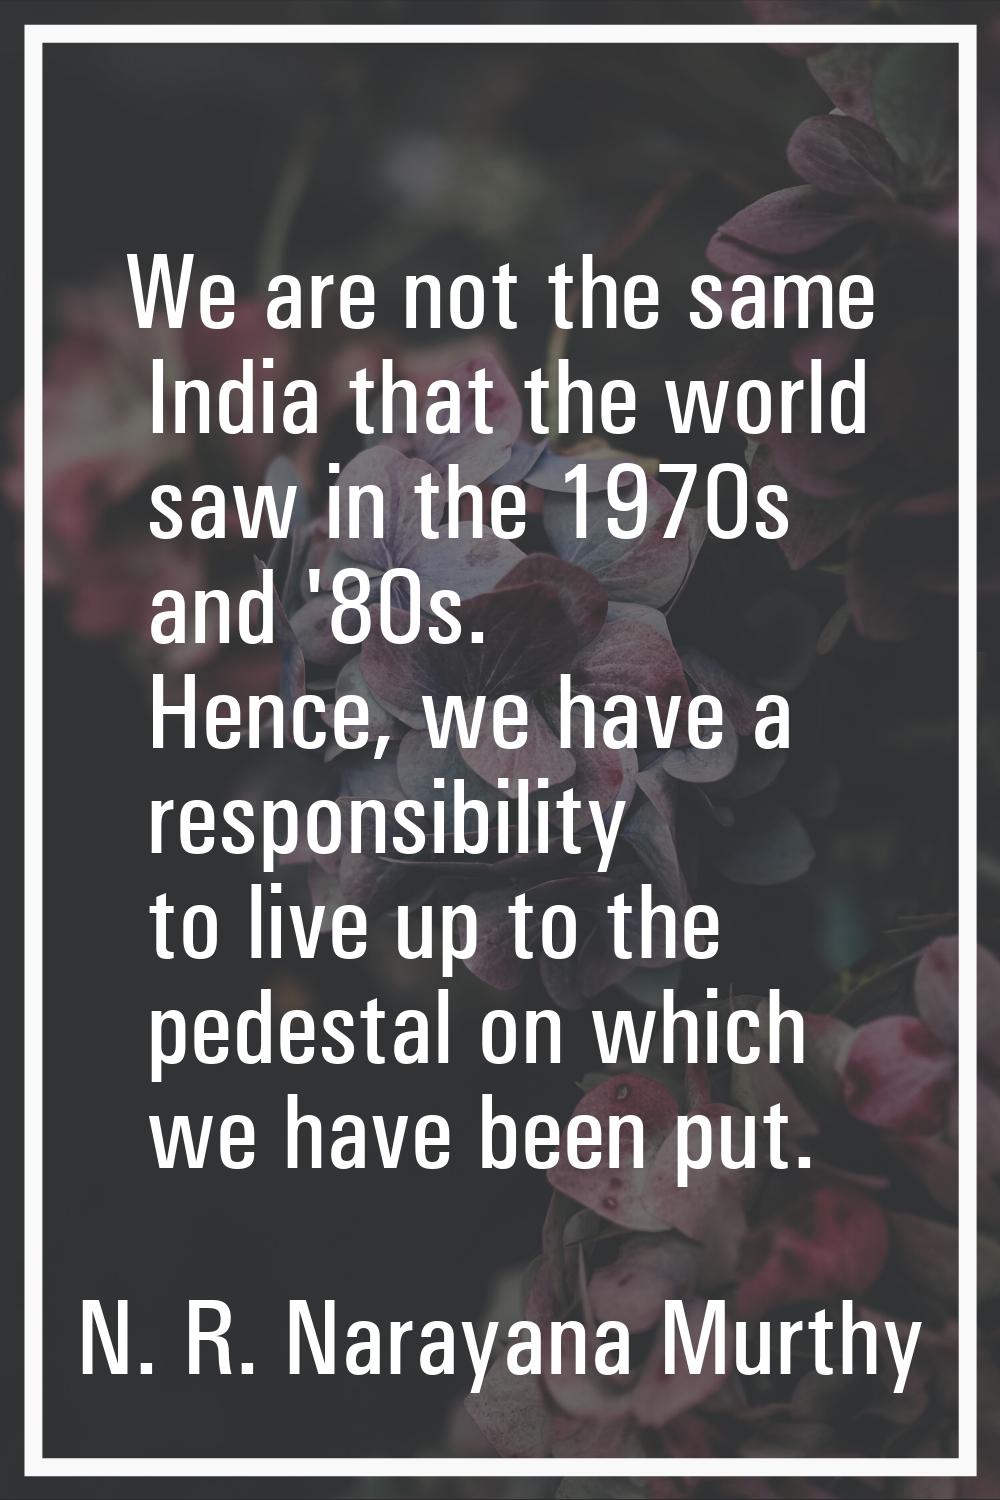 We are not the same India that the world saw in the 1970s and '80s. Hence, we have a responsibility